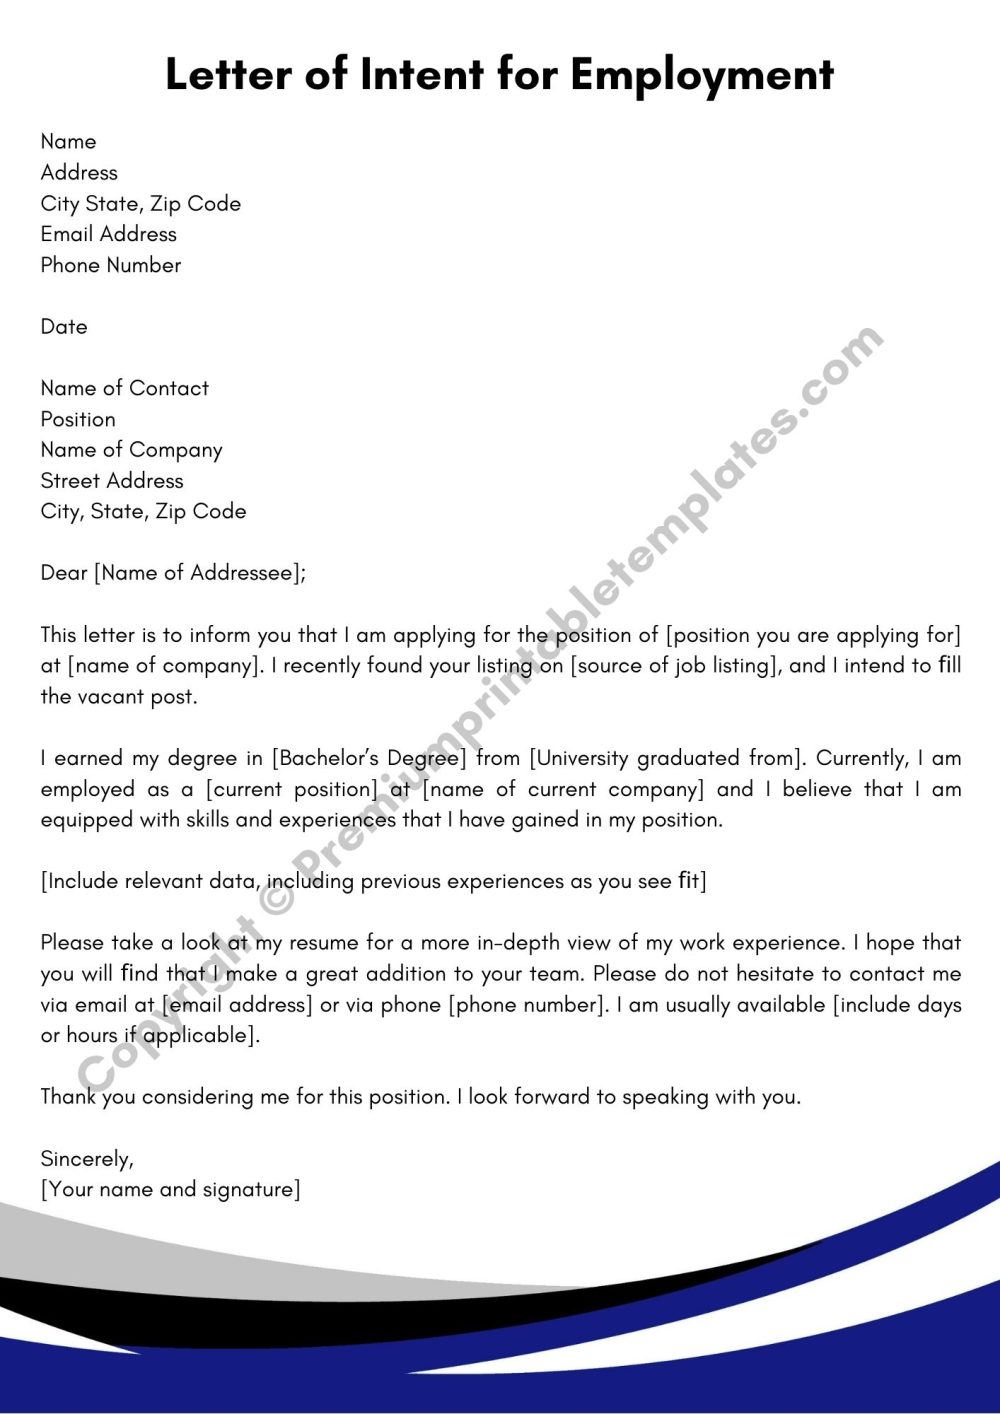 Printable Letter of Intent for Employment